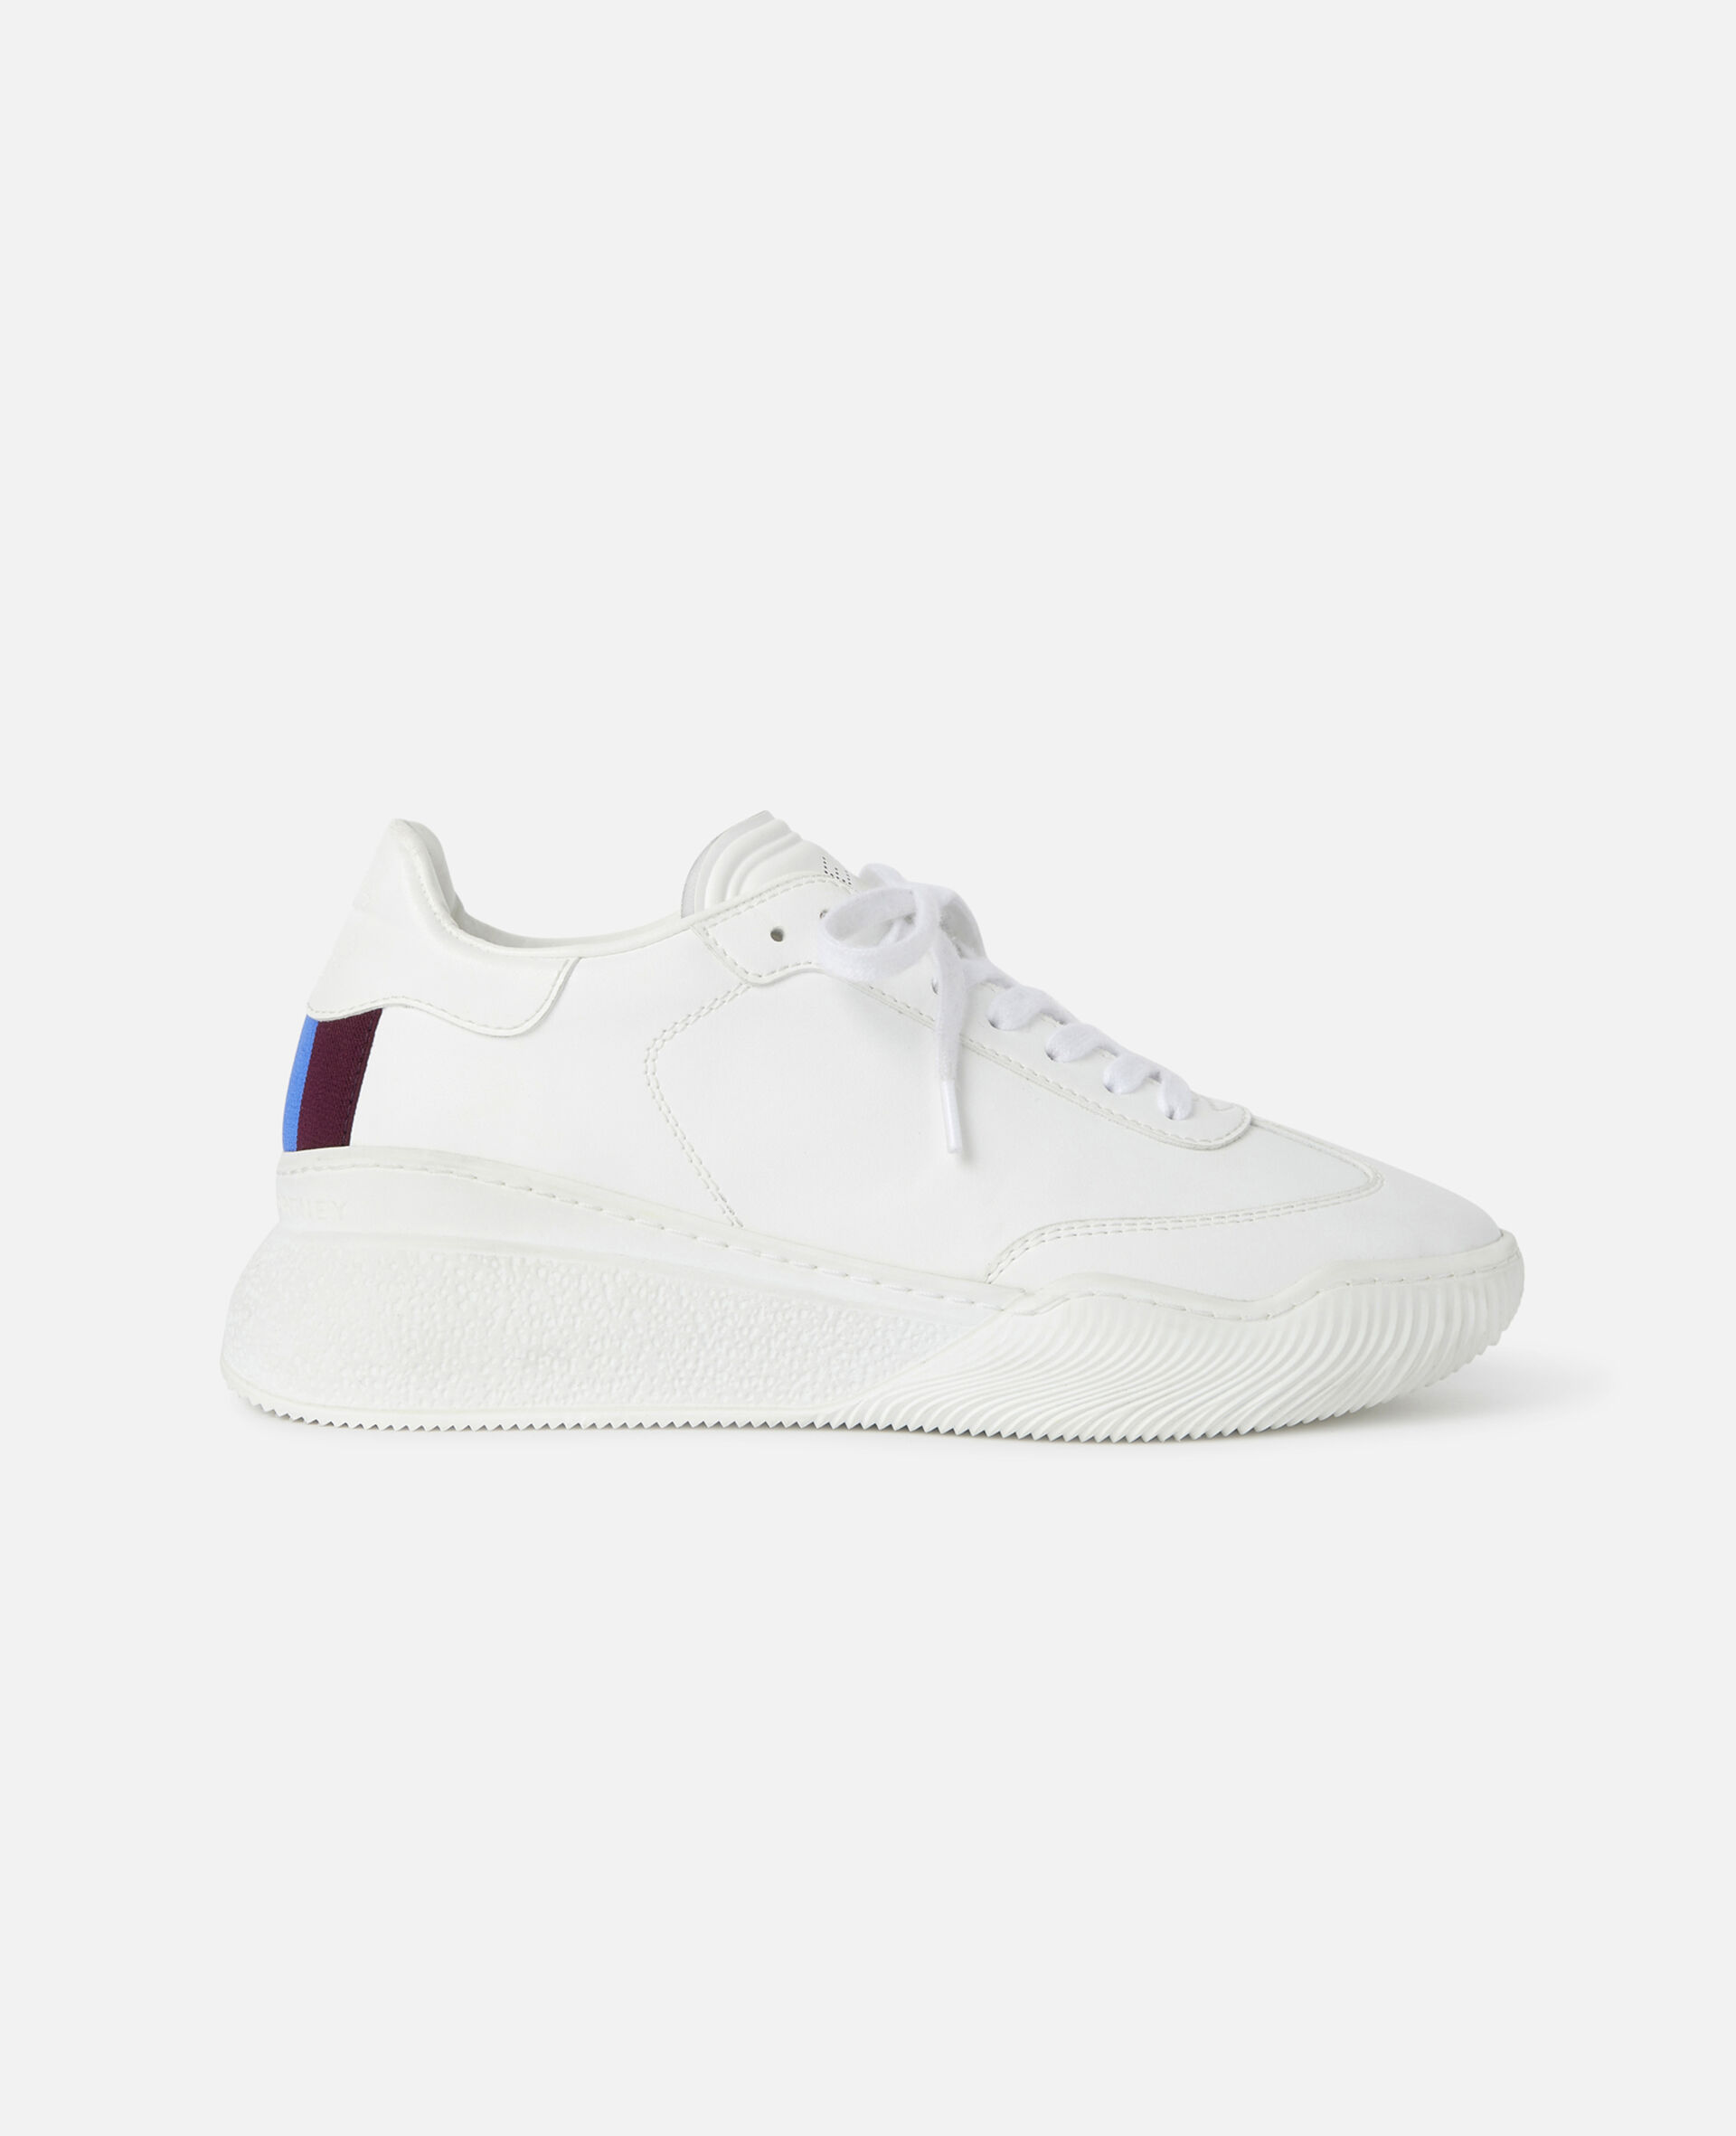 Loop Lace-up Sneakers-White-large image number 3